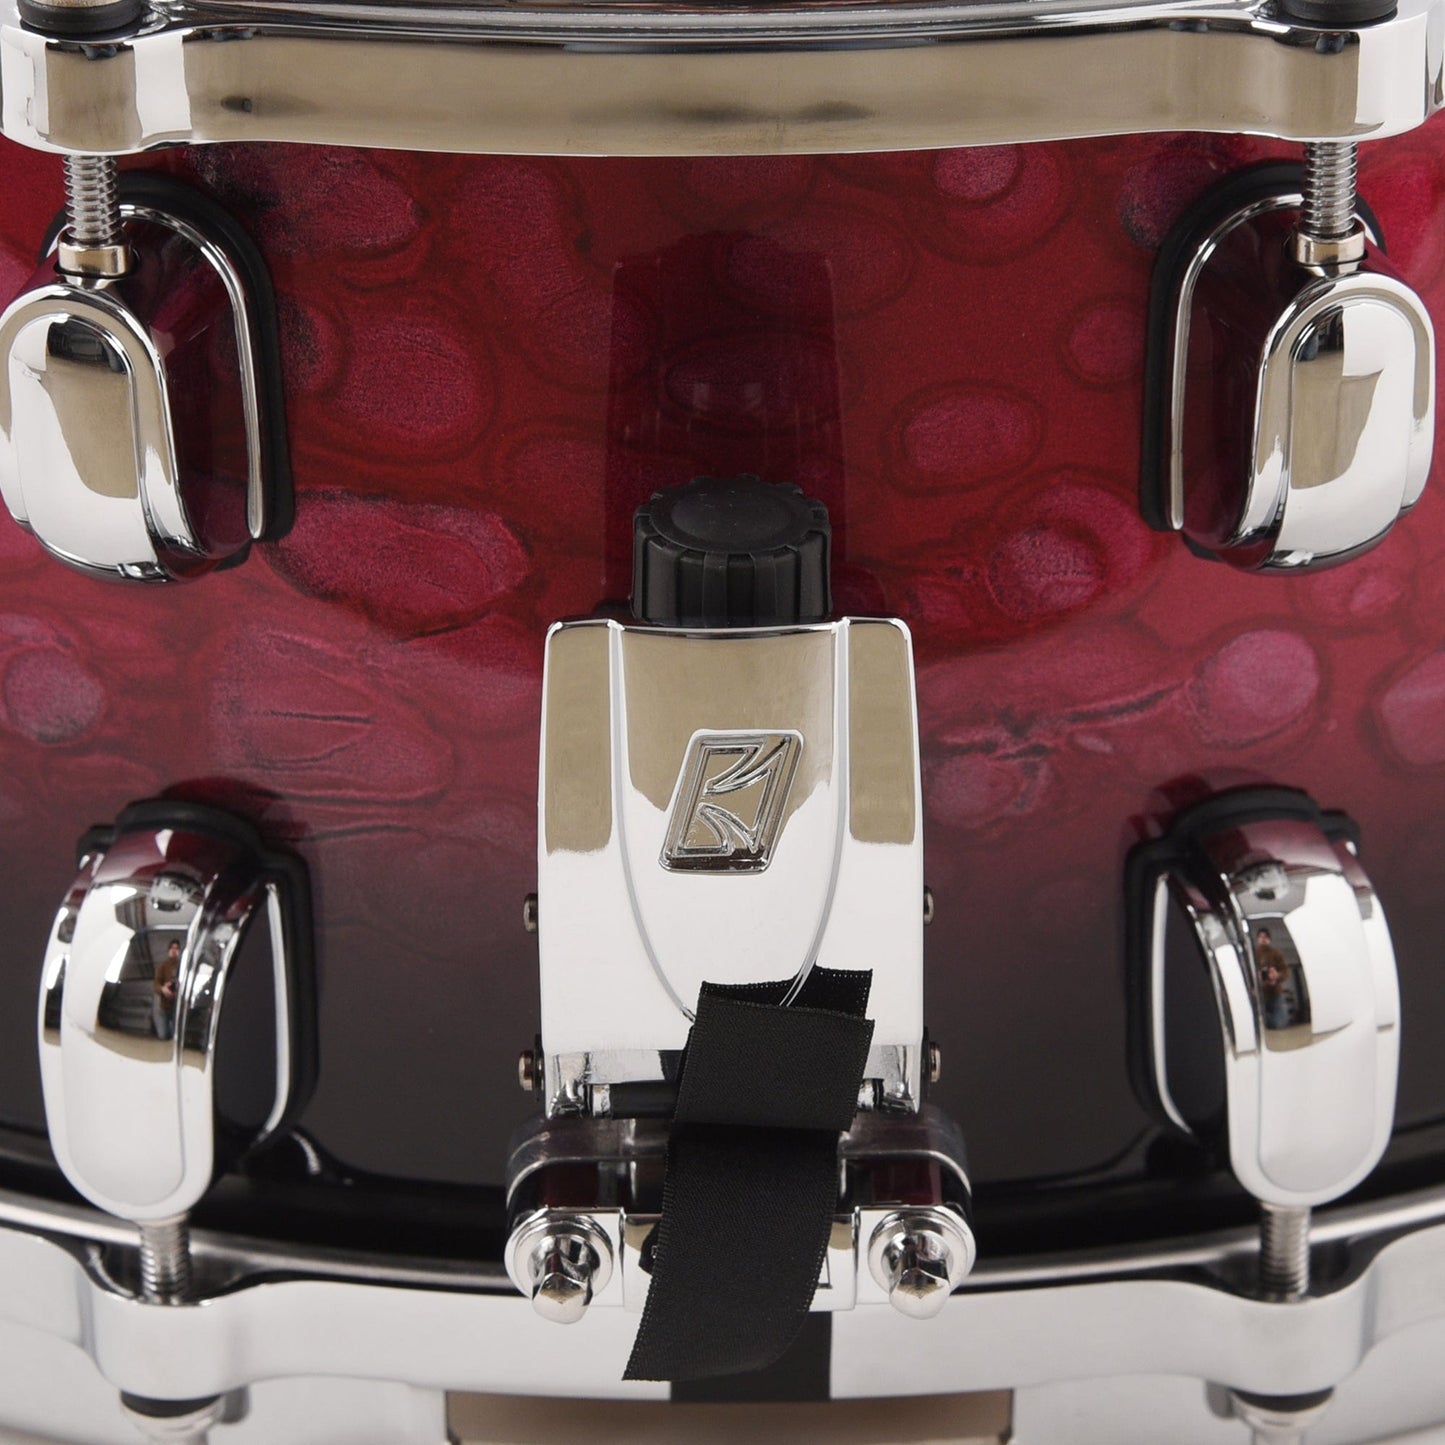 Tama Starclassic 6.5x14 Walnut/Birch Snare Drum Molten Dark Raspberry Fade Drums and Percussion / Acoustic Drums / Snare